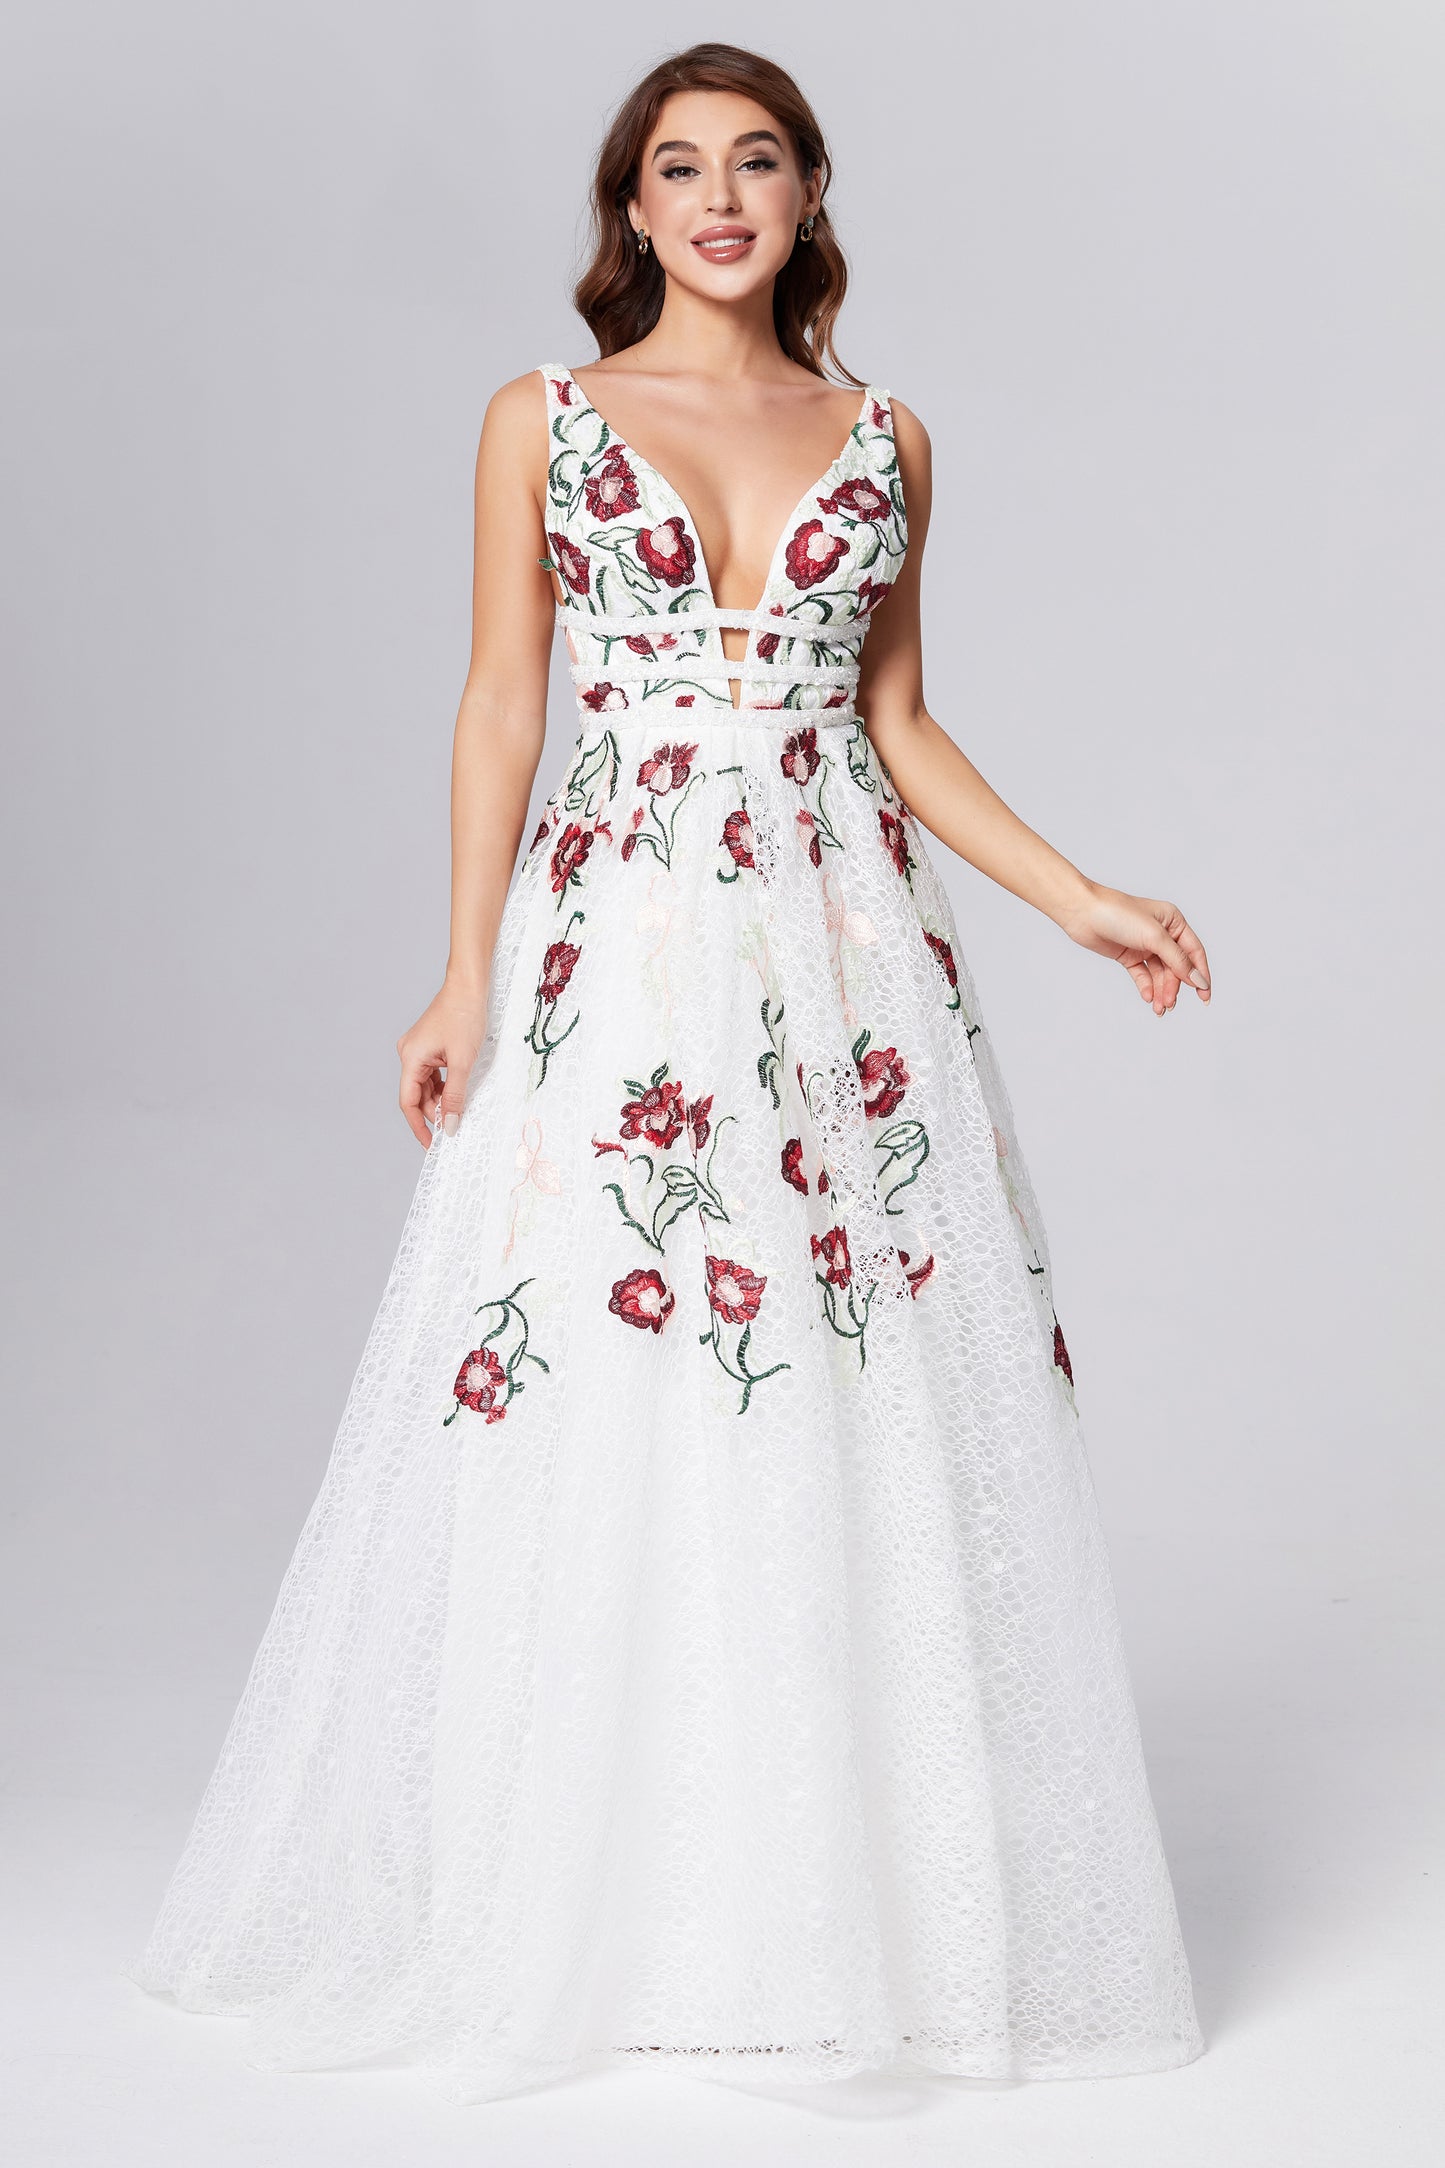 Floral Backless Lace Prom Dresses